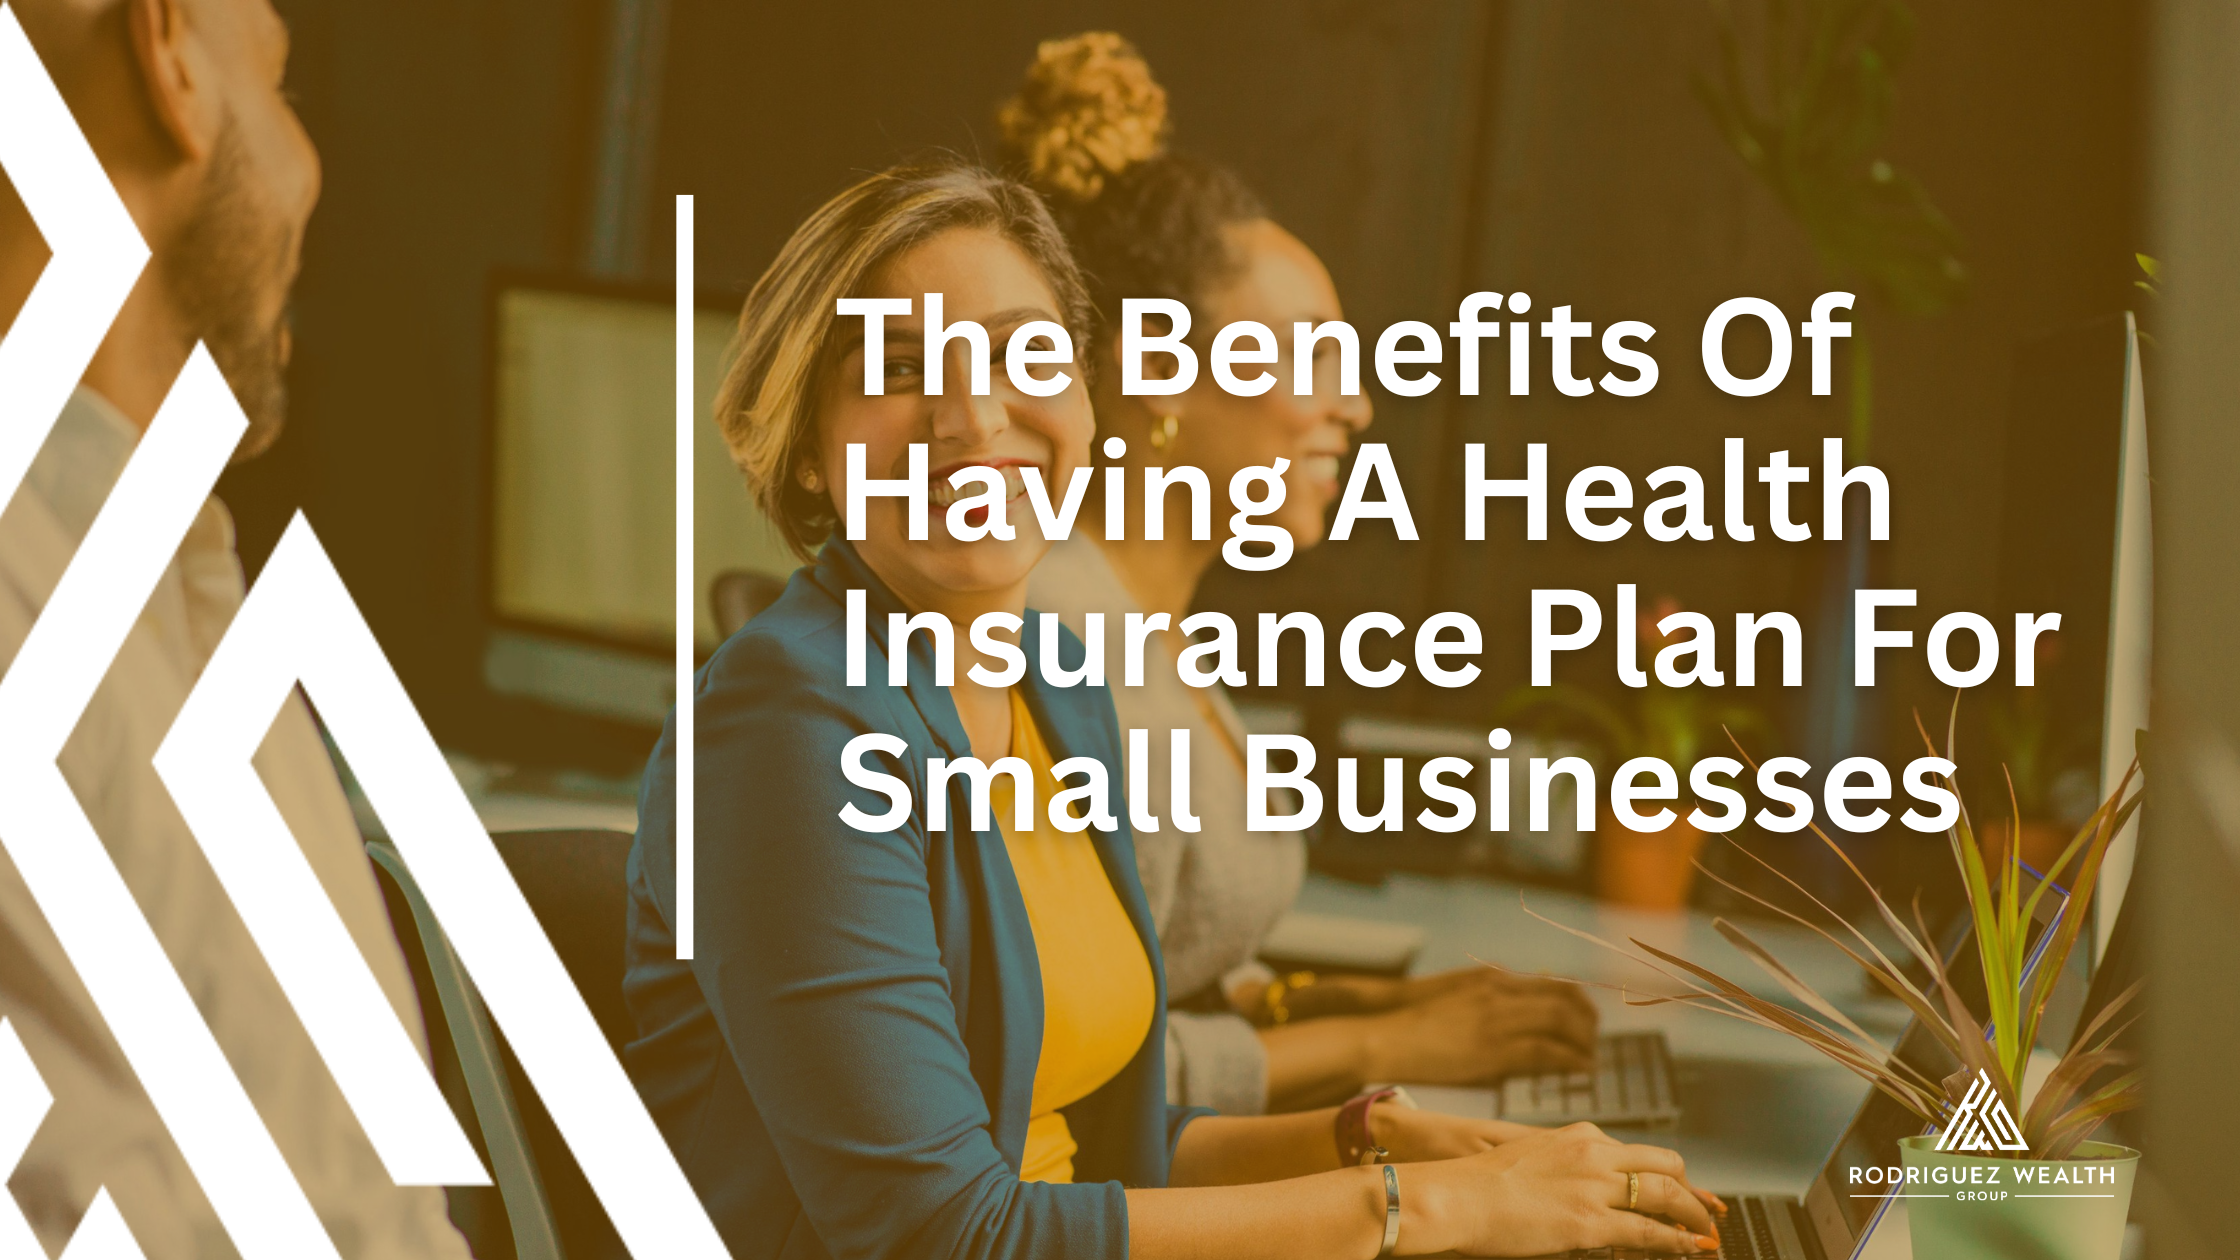 The Benefits Of Having A Health Insurance Plan For Small Businesses